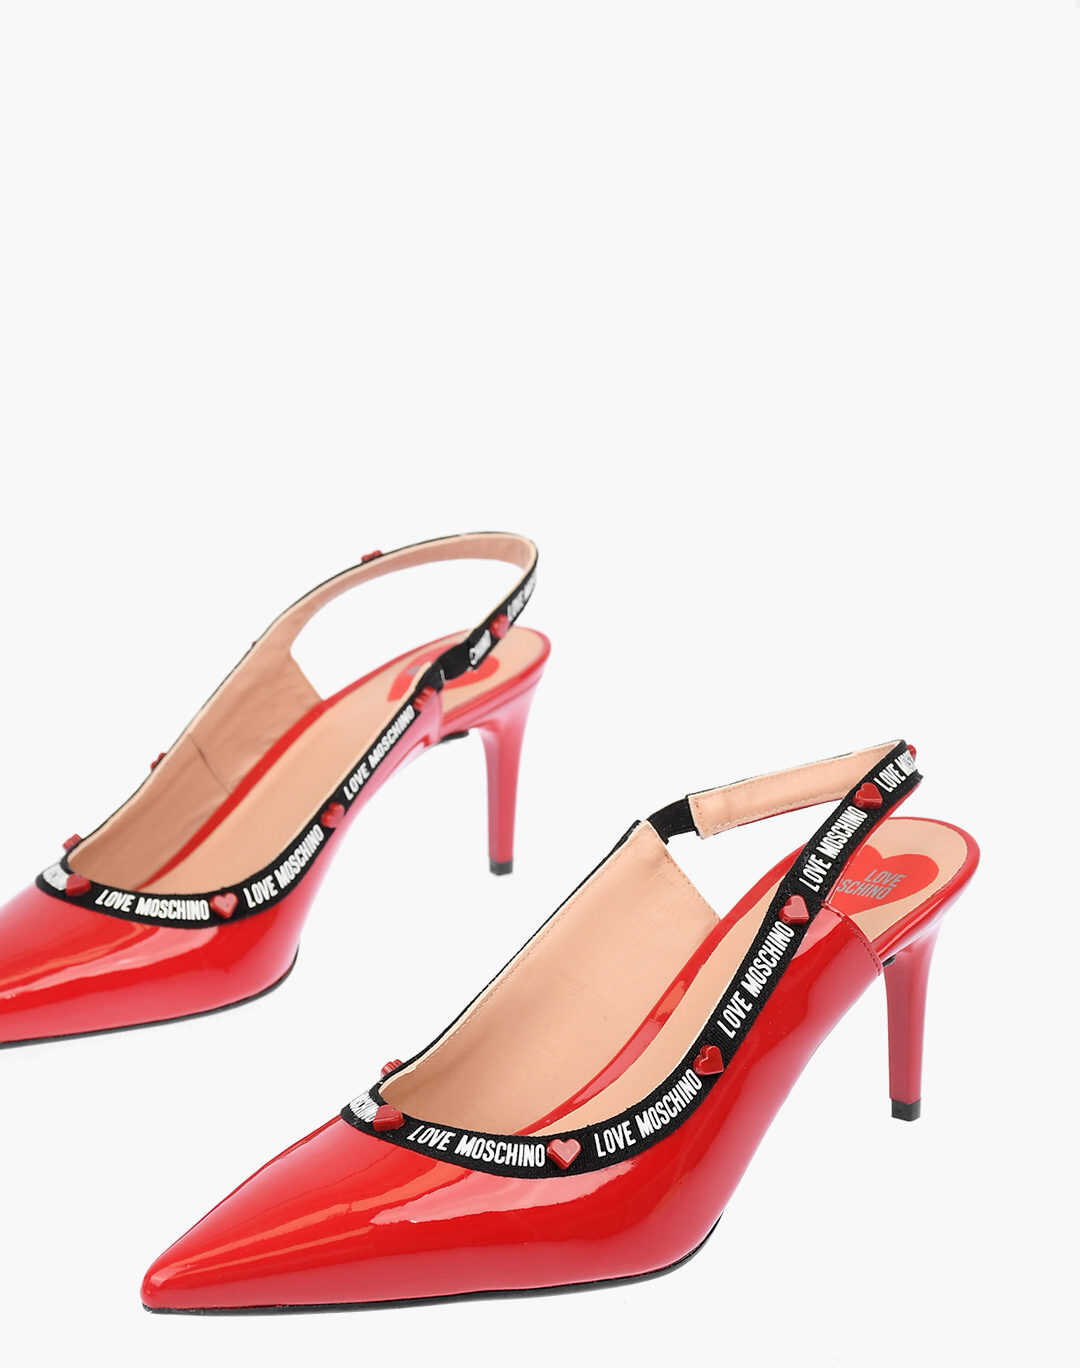 Moschino Love Patent Leather Slingback Pumps With Logo Print 7Cm* Black image